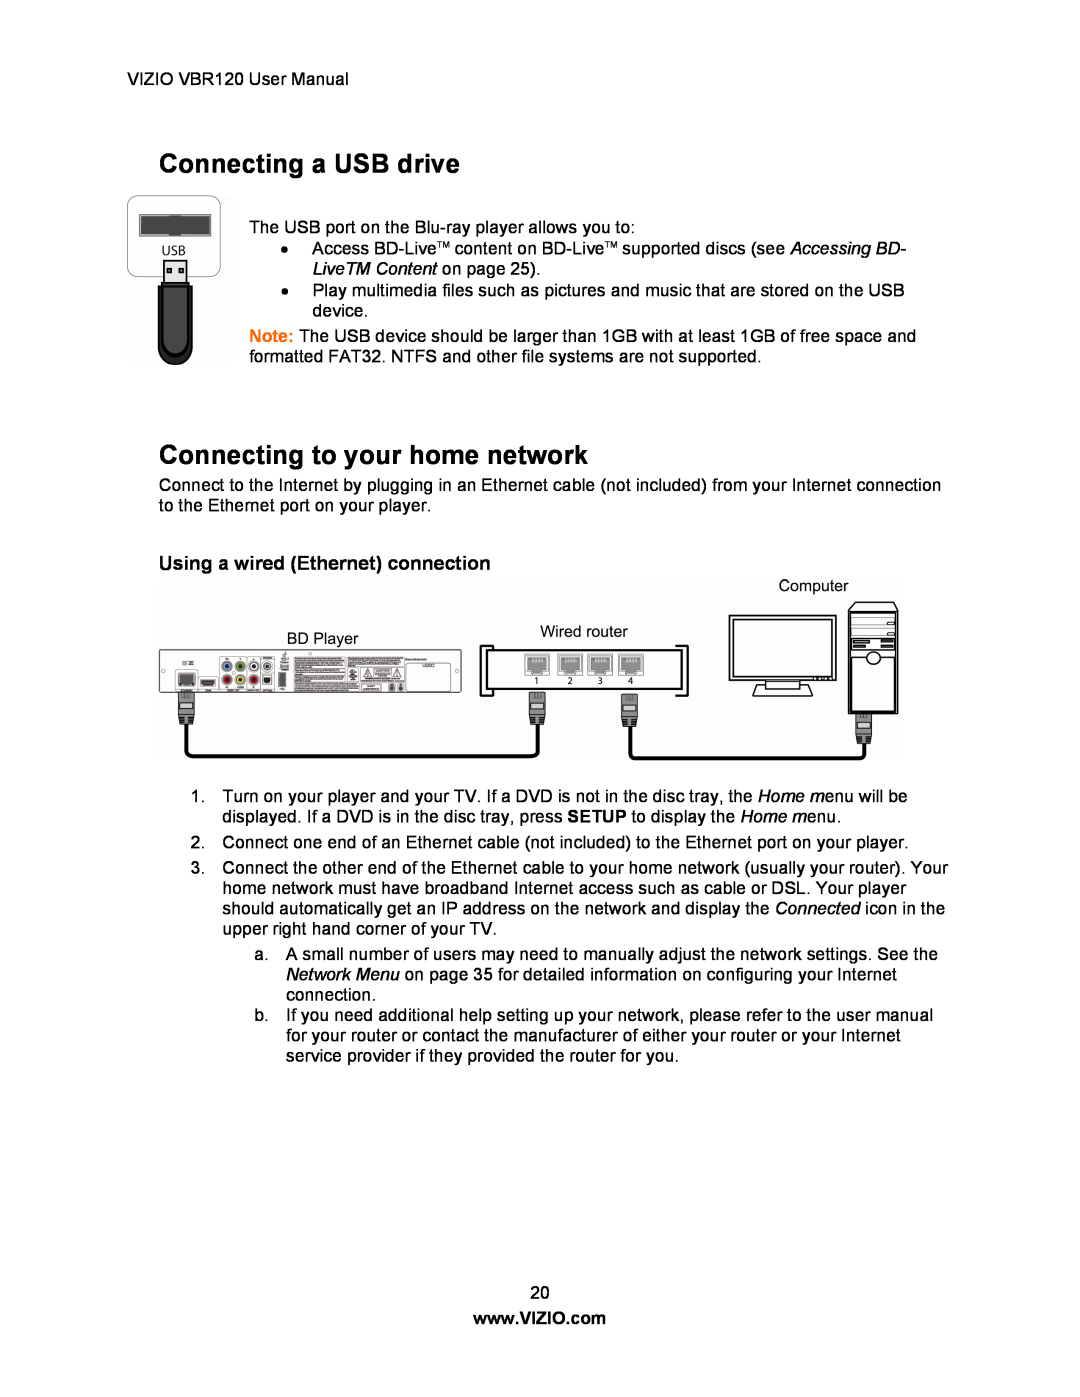 Vizio VBR 120 user manual Connecting a USB drive, Connecting to your home network, Using a wired Ethernet connection 